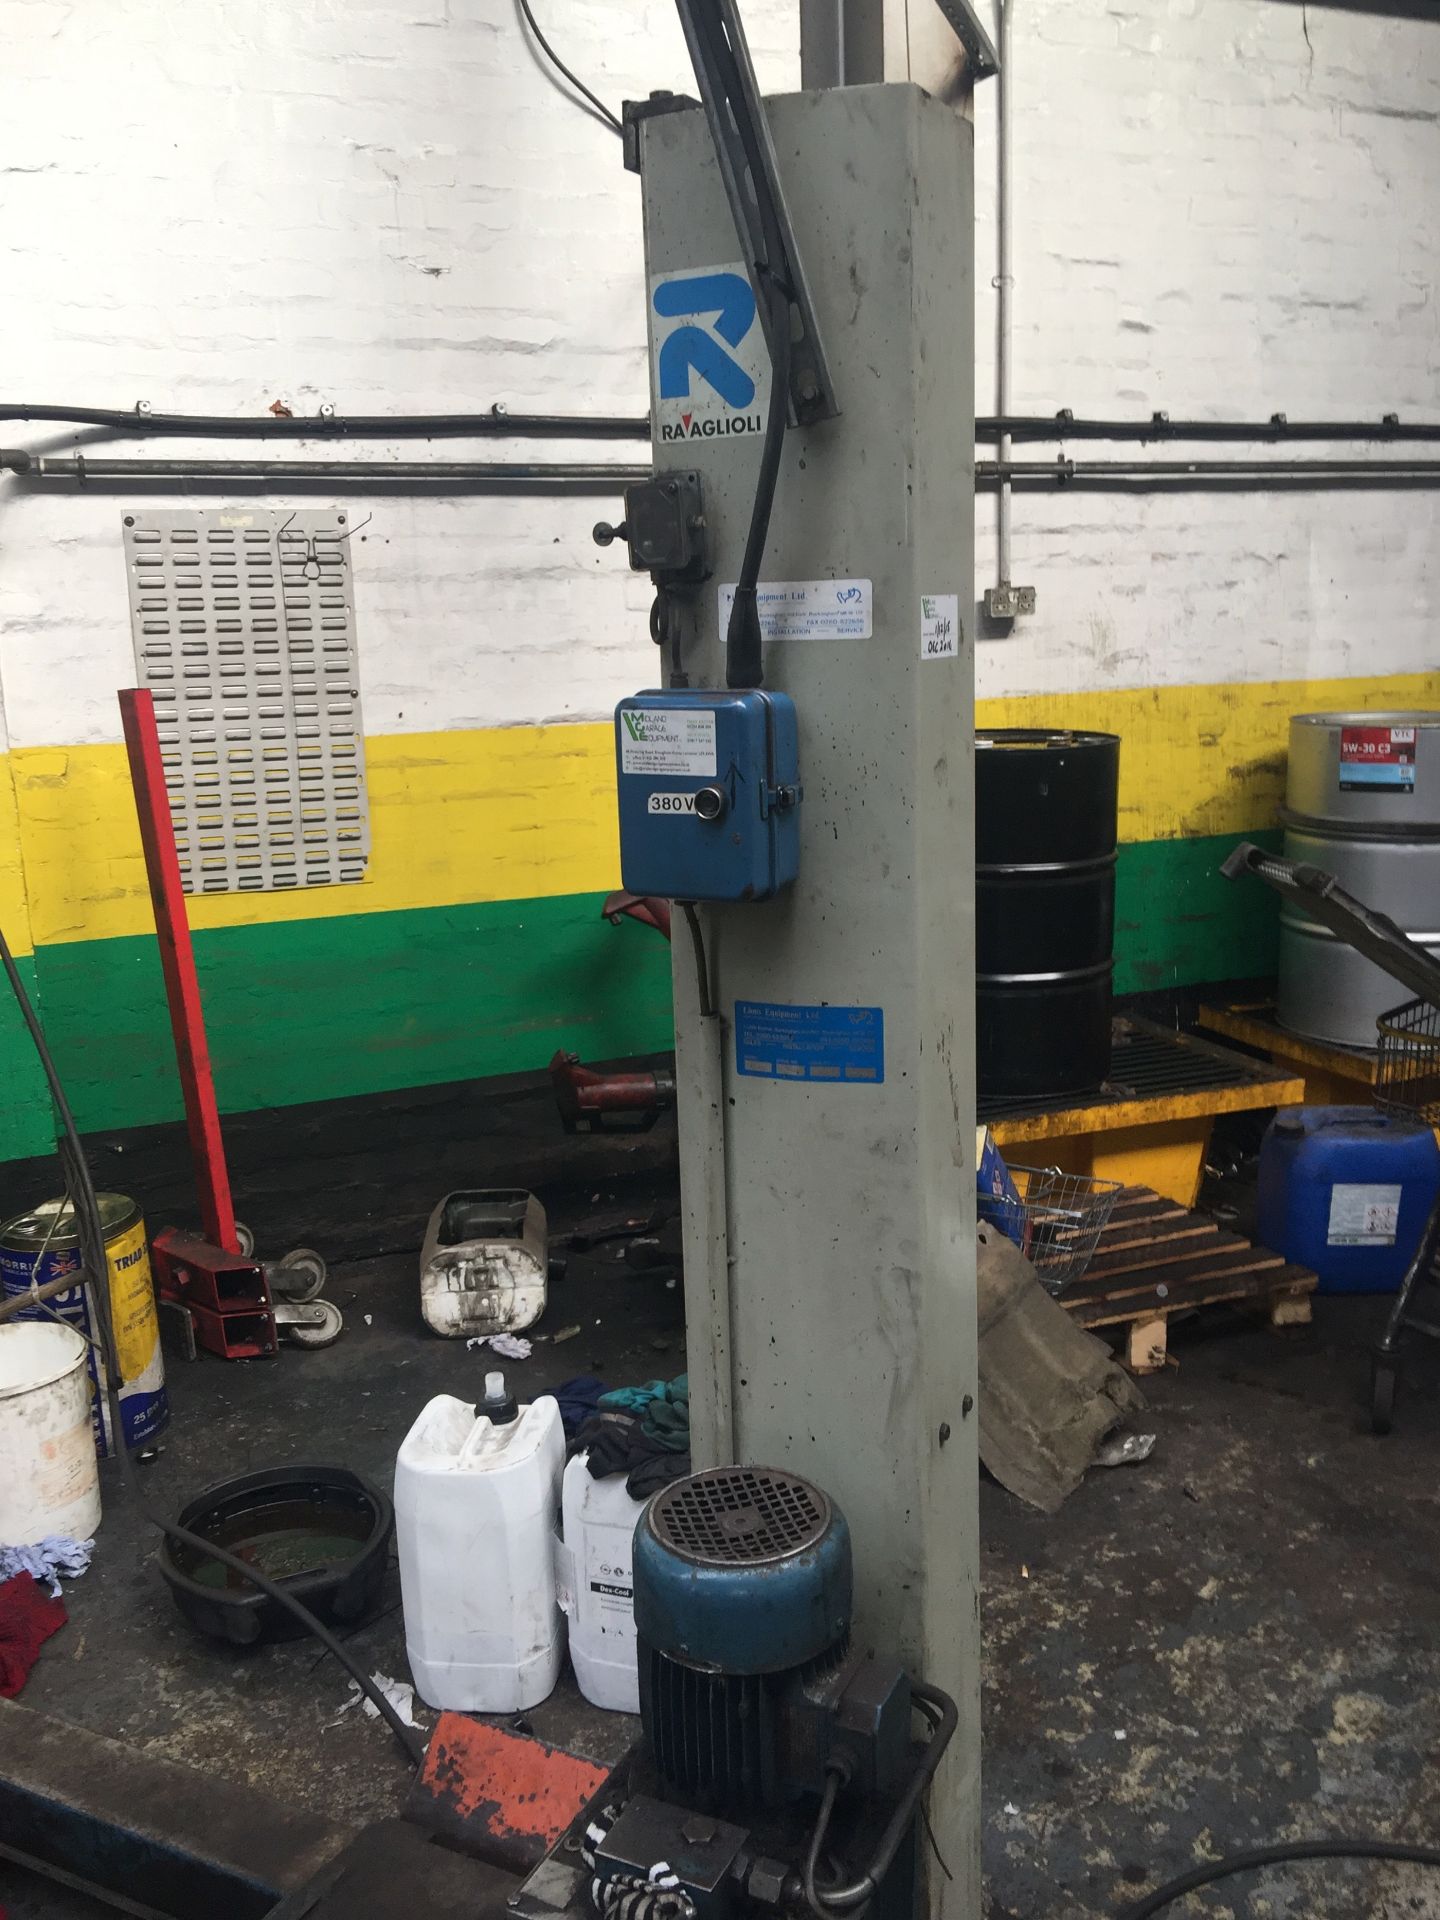 Ravaglioli KP142 4 Post Lift 3200kg 1992 - new cables fitted 2yrs ago LEIC - Image 2 of 4